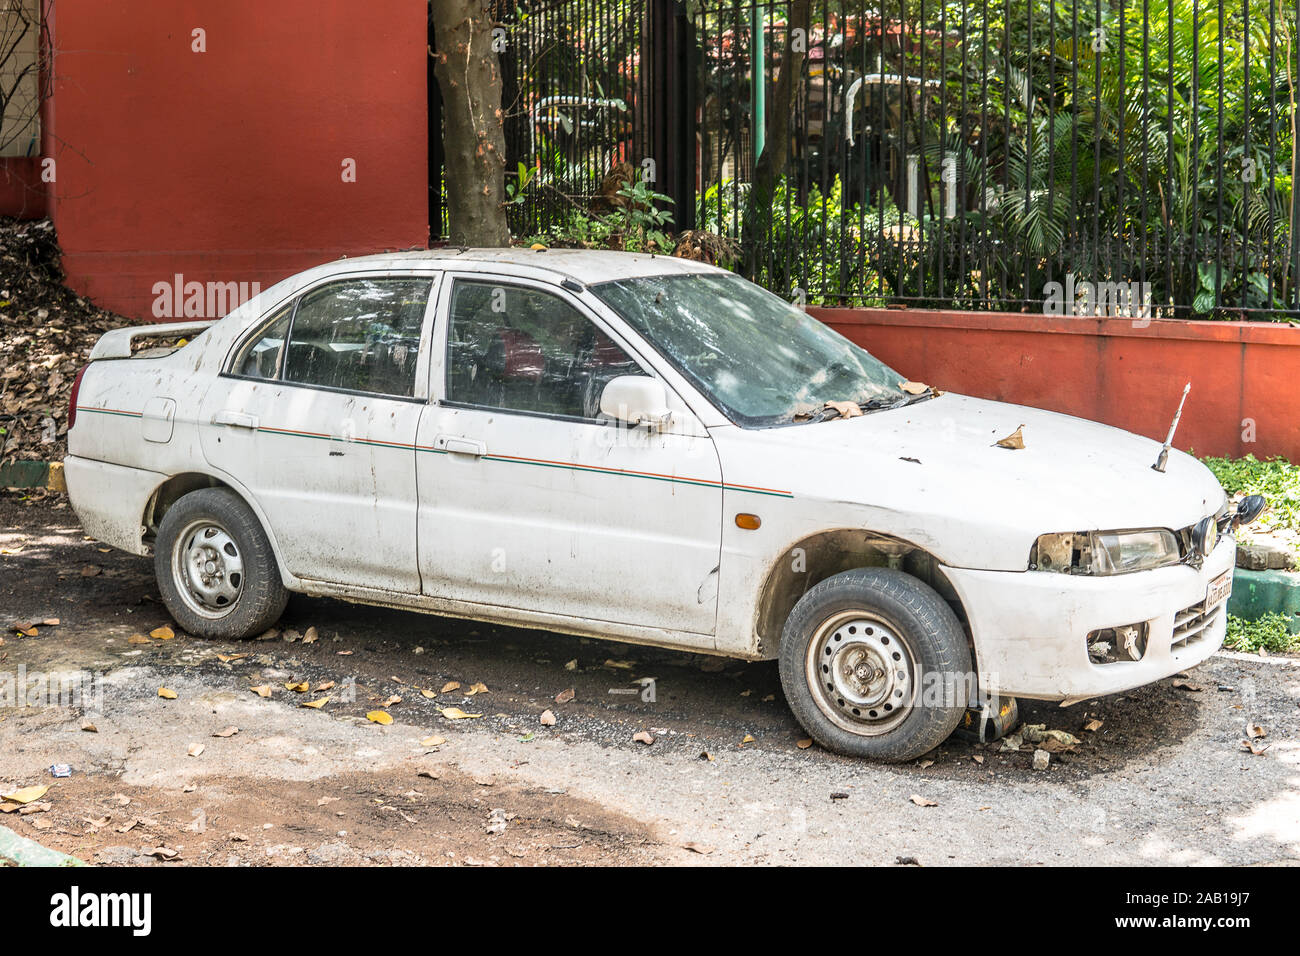 Bangalore, India, June 2018, streets of Bengaluru city, old destroyed and abandoned cars, dusty, muddy, incomplete Stock Photo